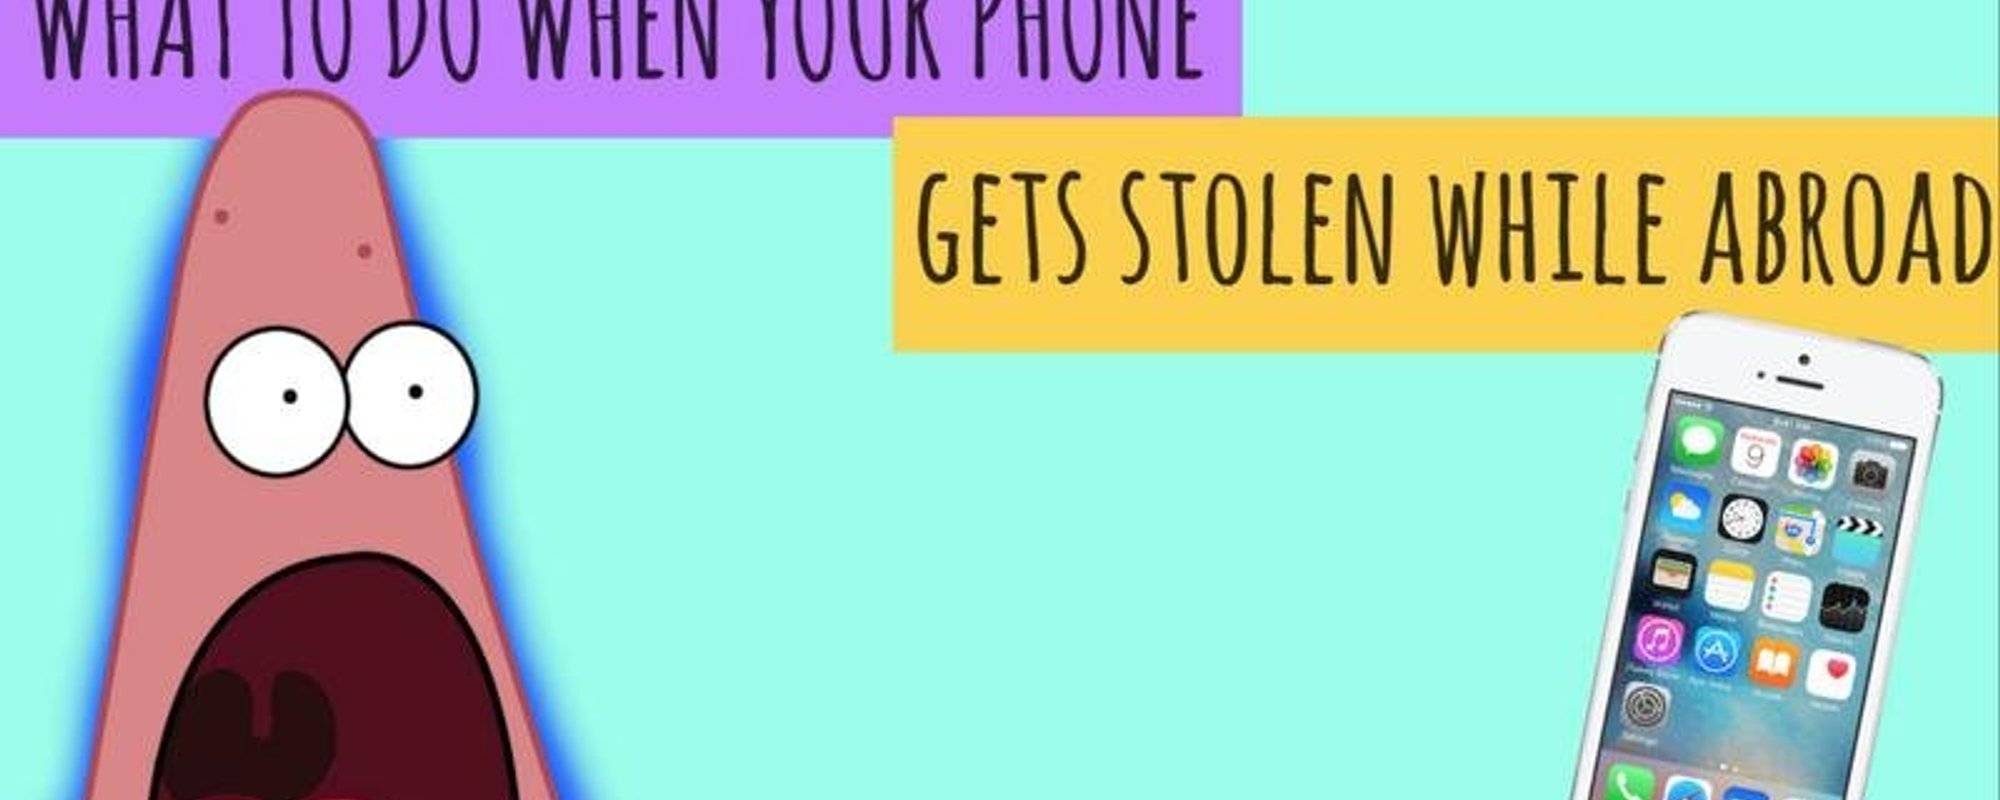 What To Do When Your Phone Gets Lost Or Stolen (While Living) Abroad